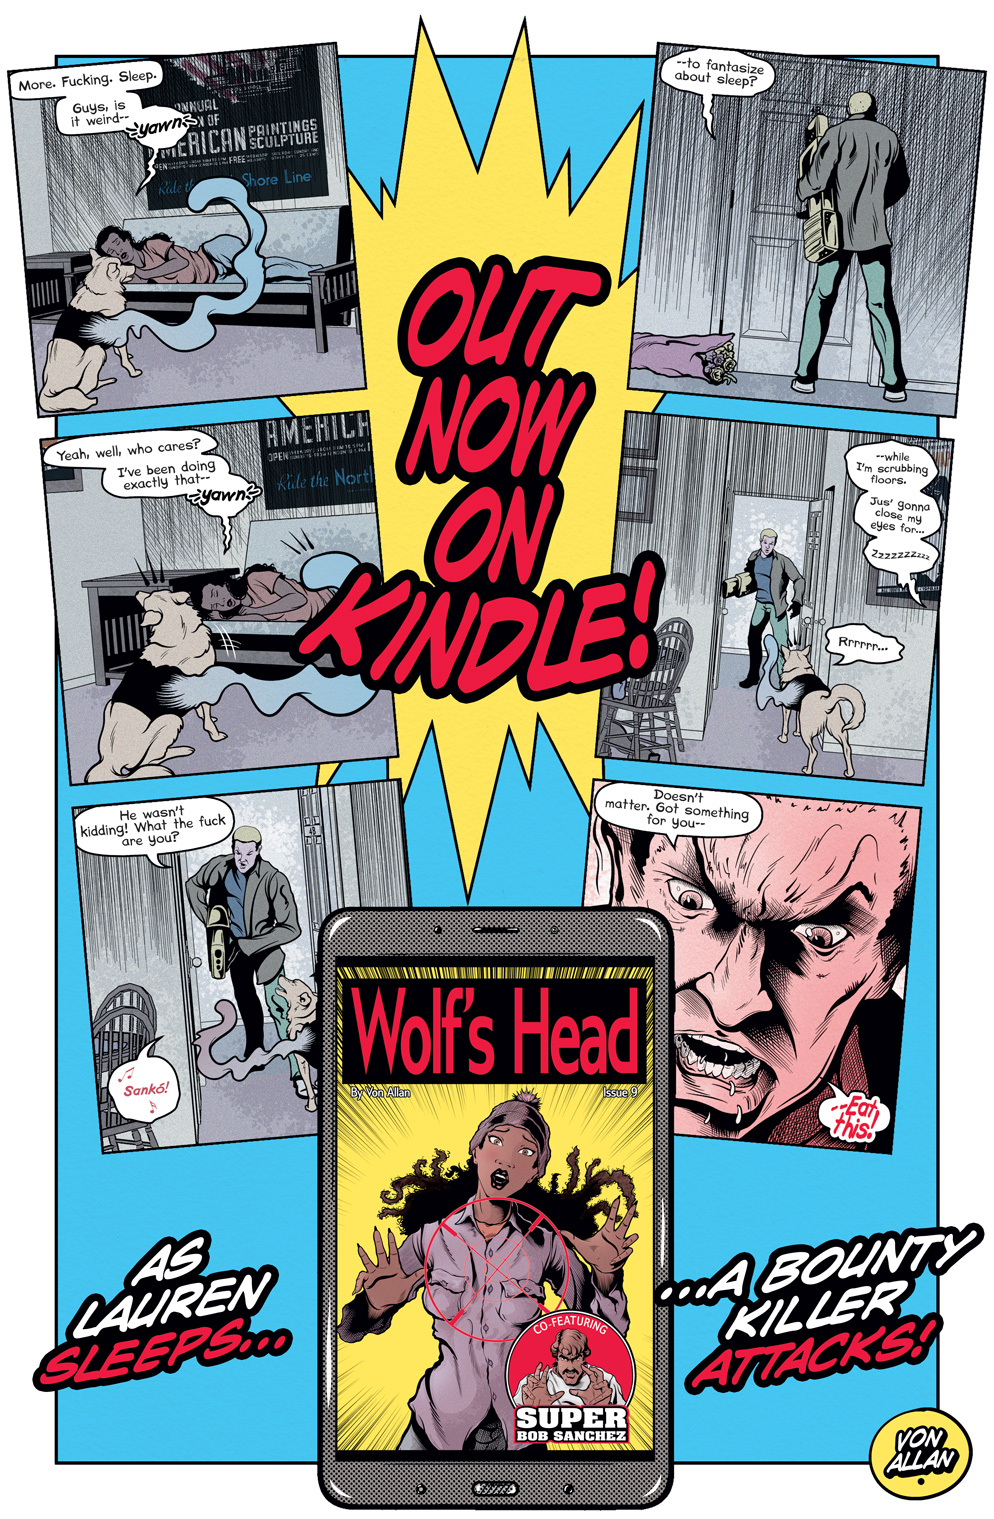 Teaser image for Wolf's Head issue 9 on Kindle